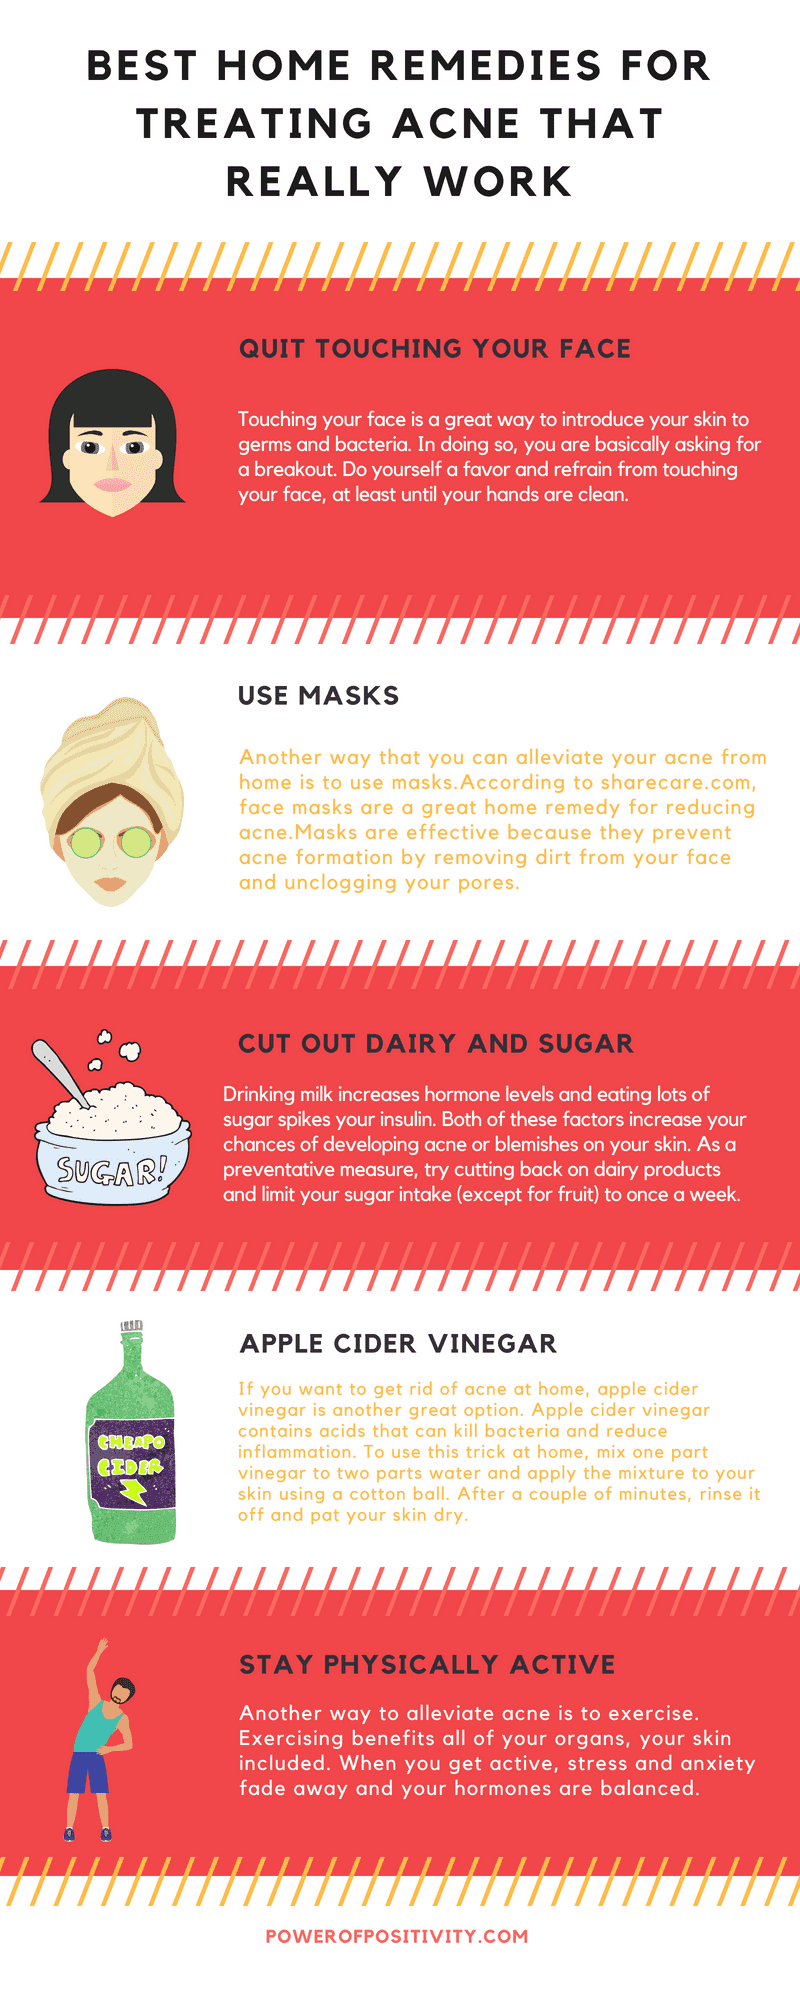 Home remedies for treating acne